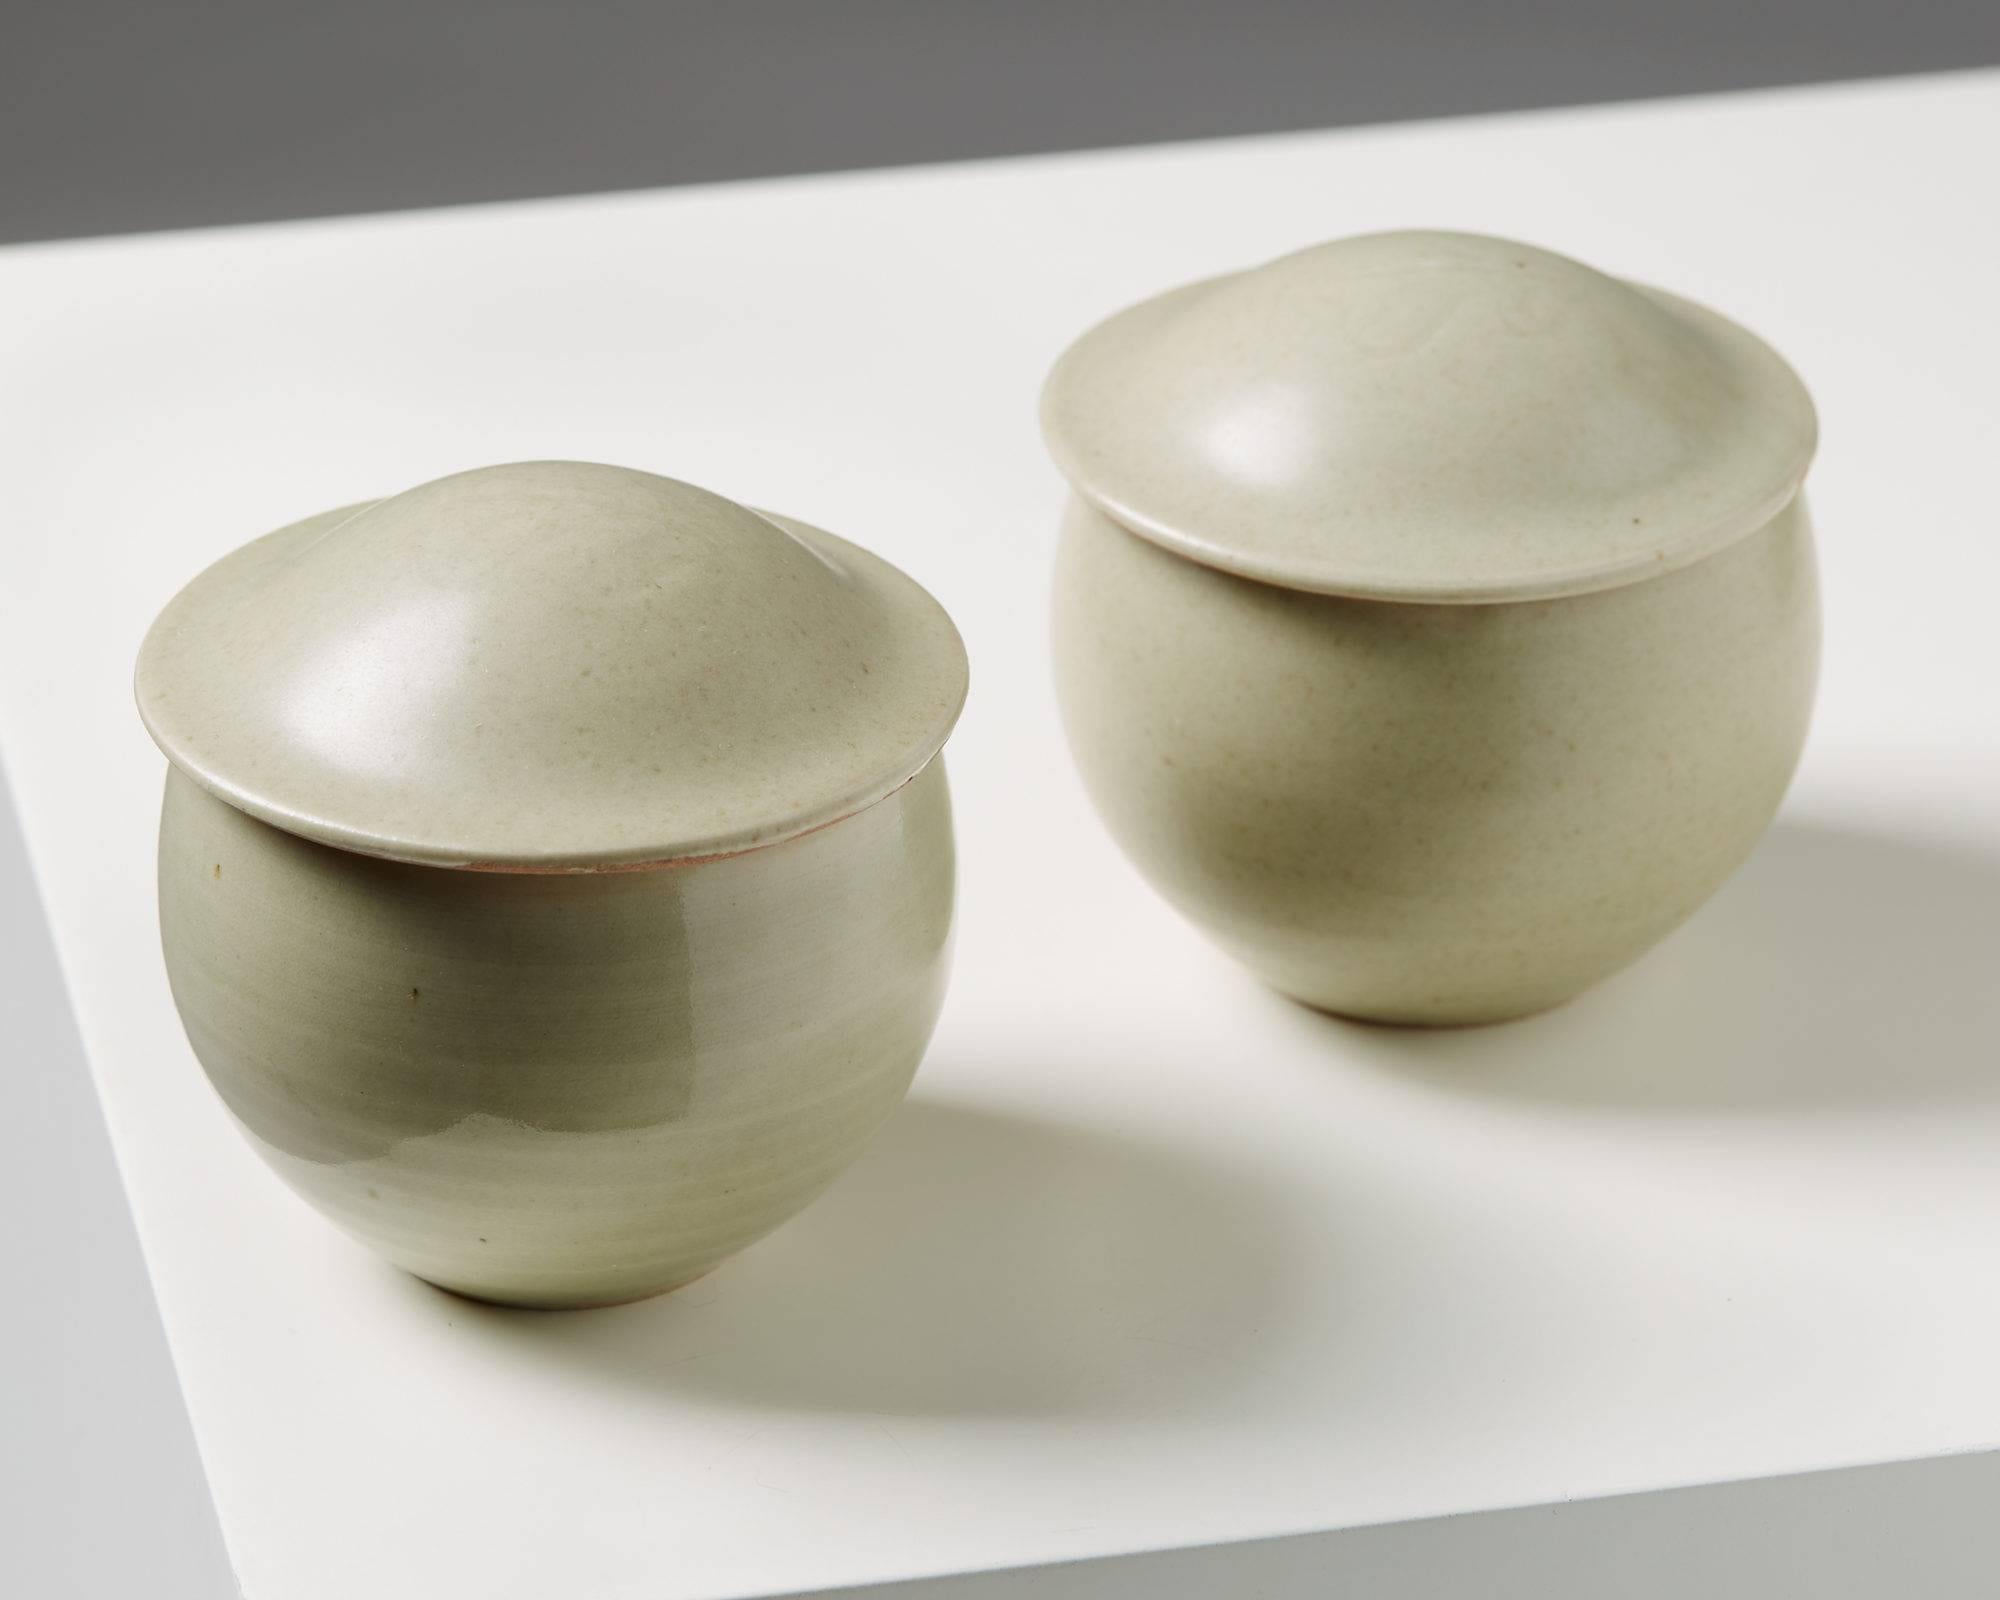 Pair of lidded bowls for St. Ives Pottery, England, 1980s. Stoneware.

Measures: Height 10 cm / 4''
Diameter 10 cm / 4''.